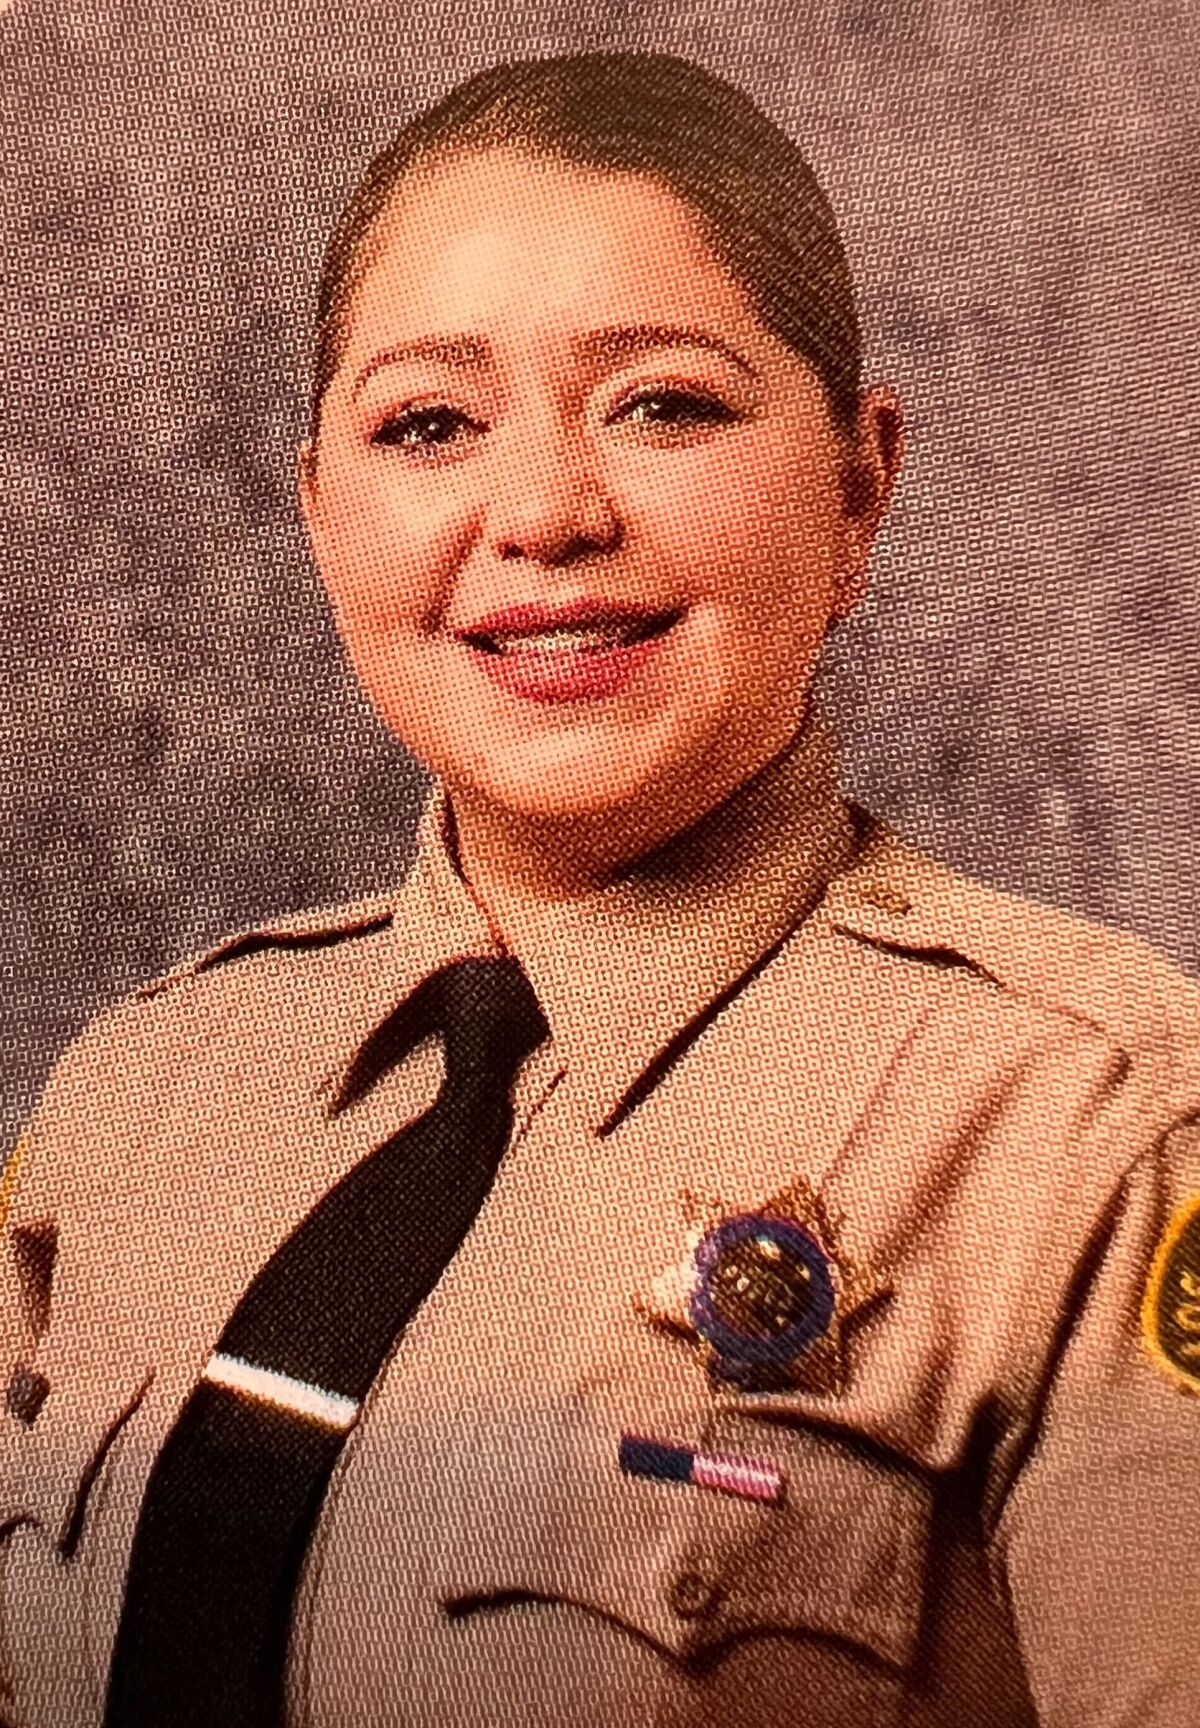 Deputy Carrie Robles